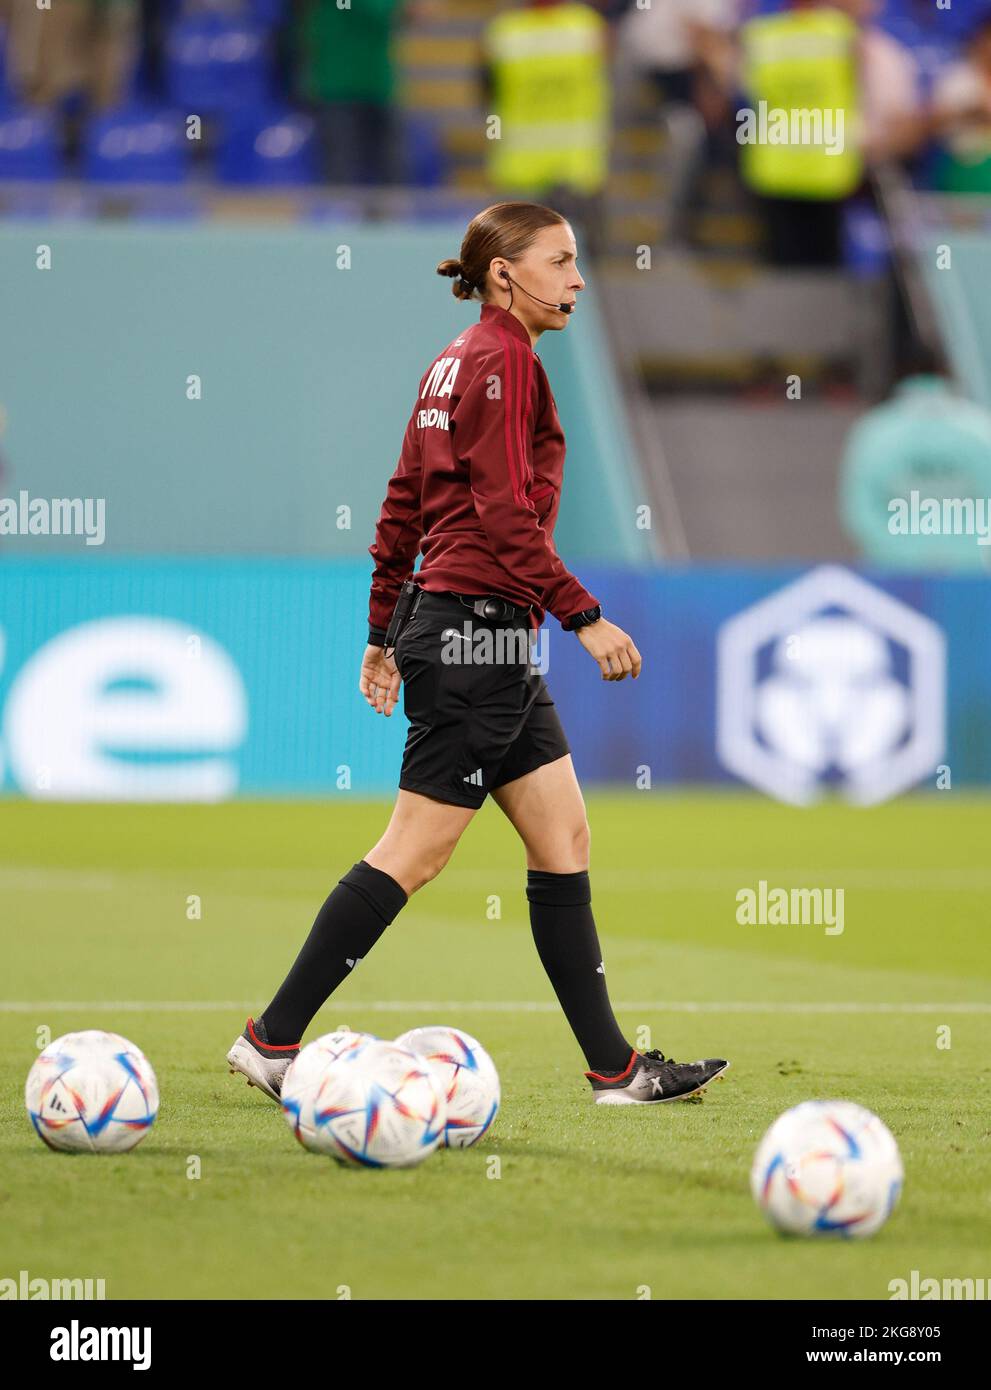 Doha, Qatar. 22nd Nov, 2022. The 4th official Stephanie Frappart is seen prior to the Group C match between Mexico and Poland of the 2022 FIFA World Cup at Ras Abu Aboud (974) Stadium in Doha, Qatar, Nov. 22, 2022. Credit: Wang Lili/Xinhua/Alamy Live News Stock Photo